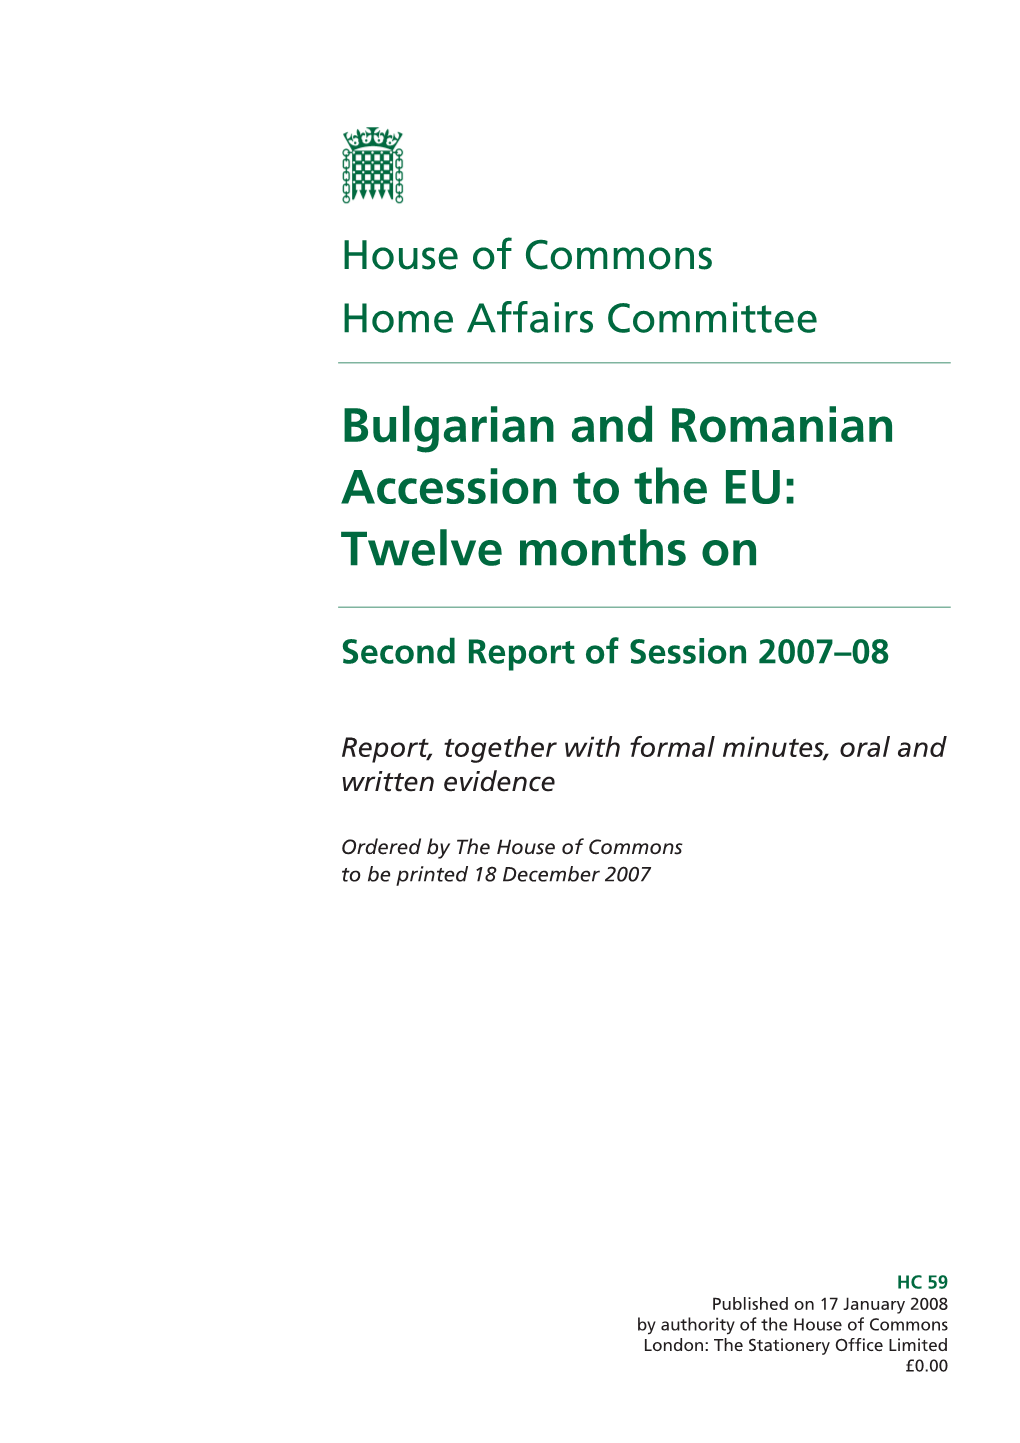 Bulgarian and Romanian Accession to the EU: Twelve Months On